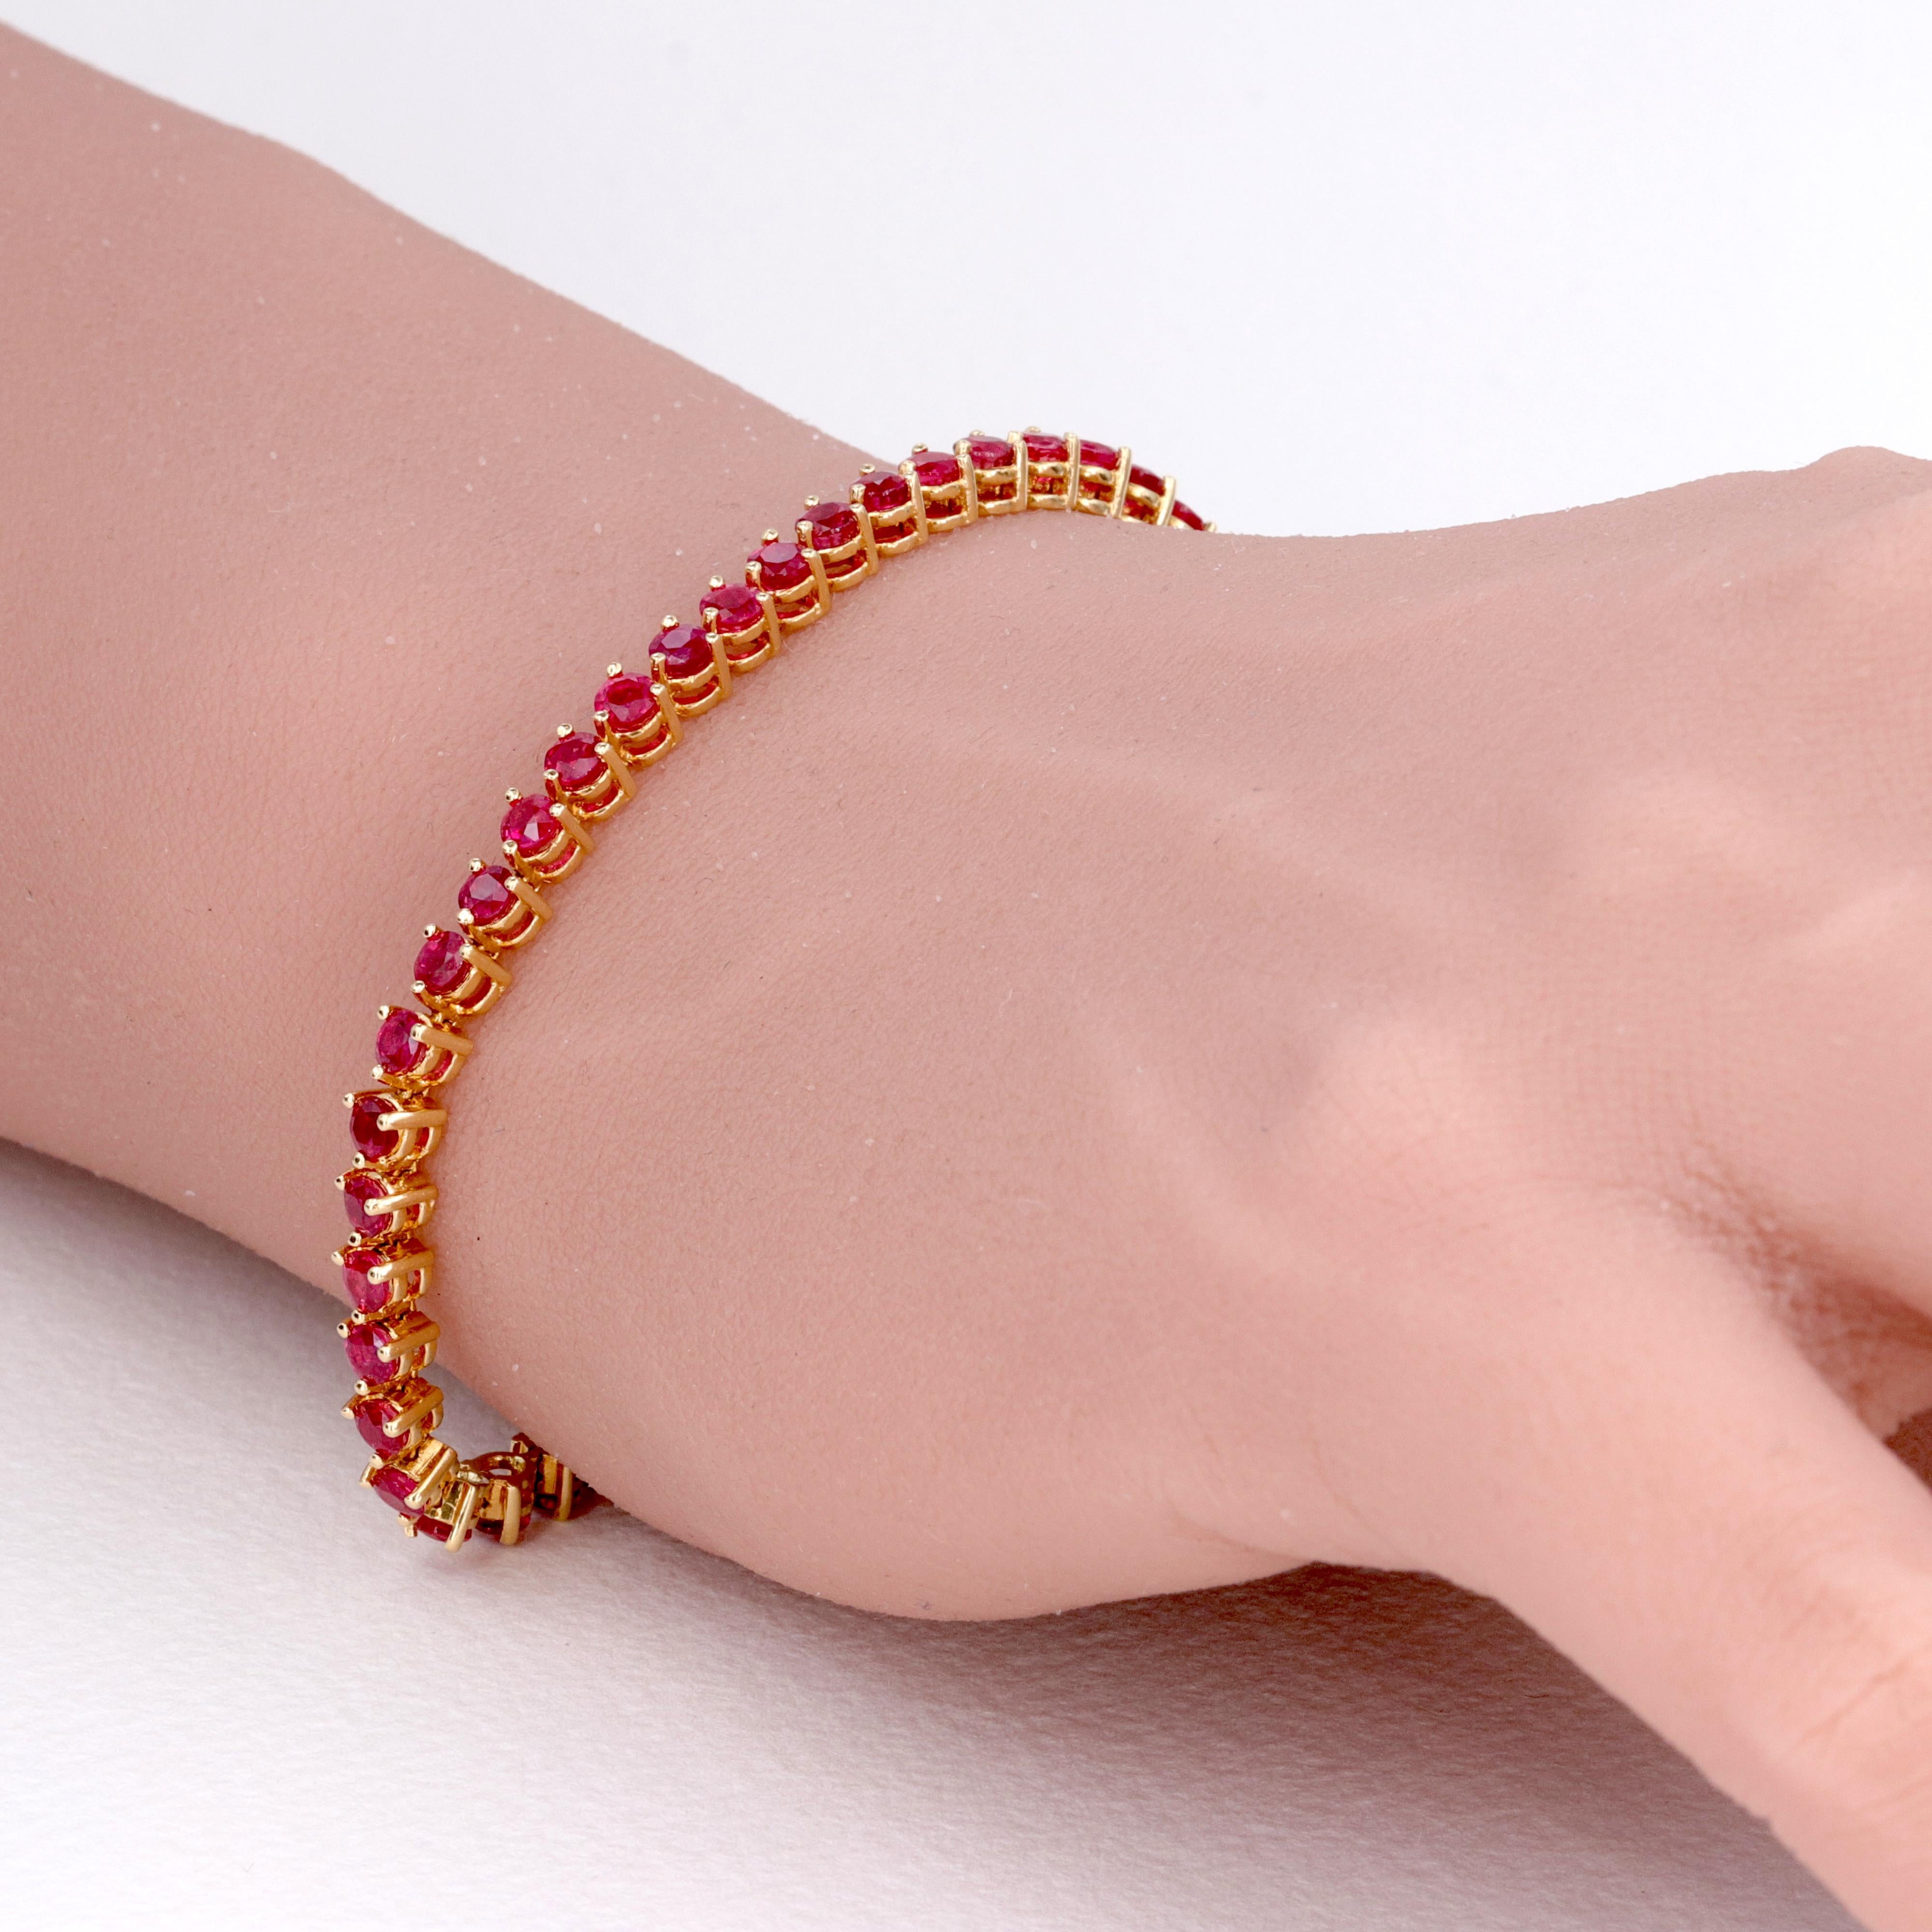 Vivid Red Natural Red Ruby Tennis Bracelet Set in 18 Karat Yellow Gold 

Rubies - 50 Rubies = 5.45 Carats 
Color - Vivid Red 
Clarity - Eye Clean
Metal - 18 Karat Yellow Gold 
Weight - 11.6 Grams
Length - 7.25 Inches